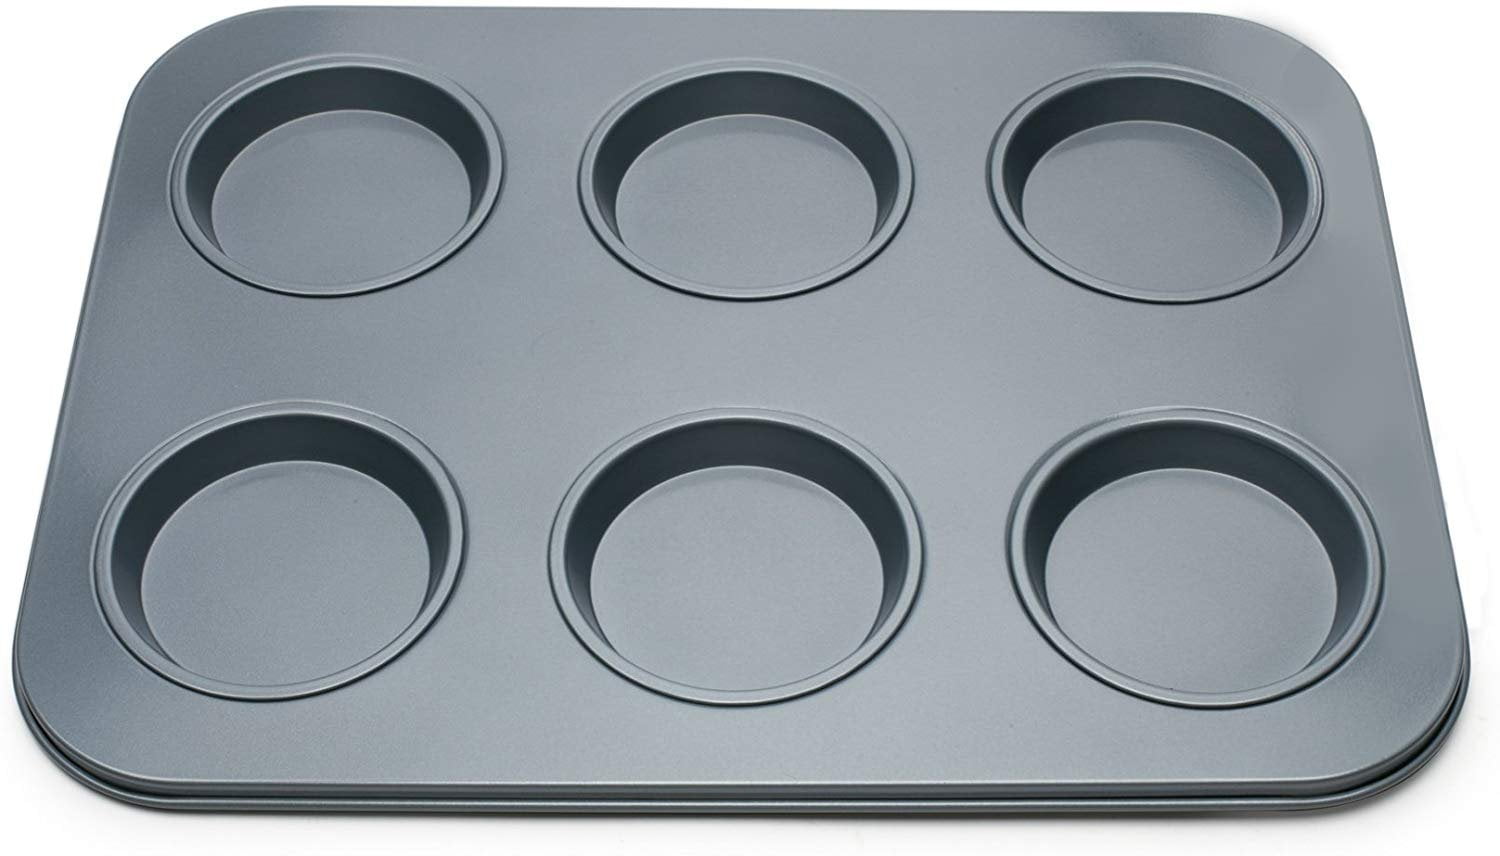 Fox Run Brands Non-Stick 6 Cup Large Shallow Muffin Pan & Reviews